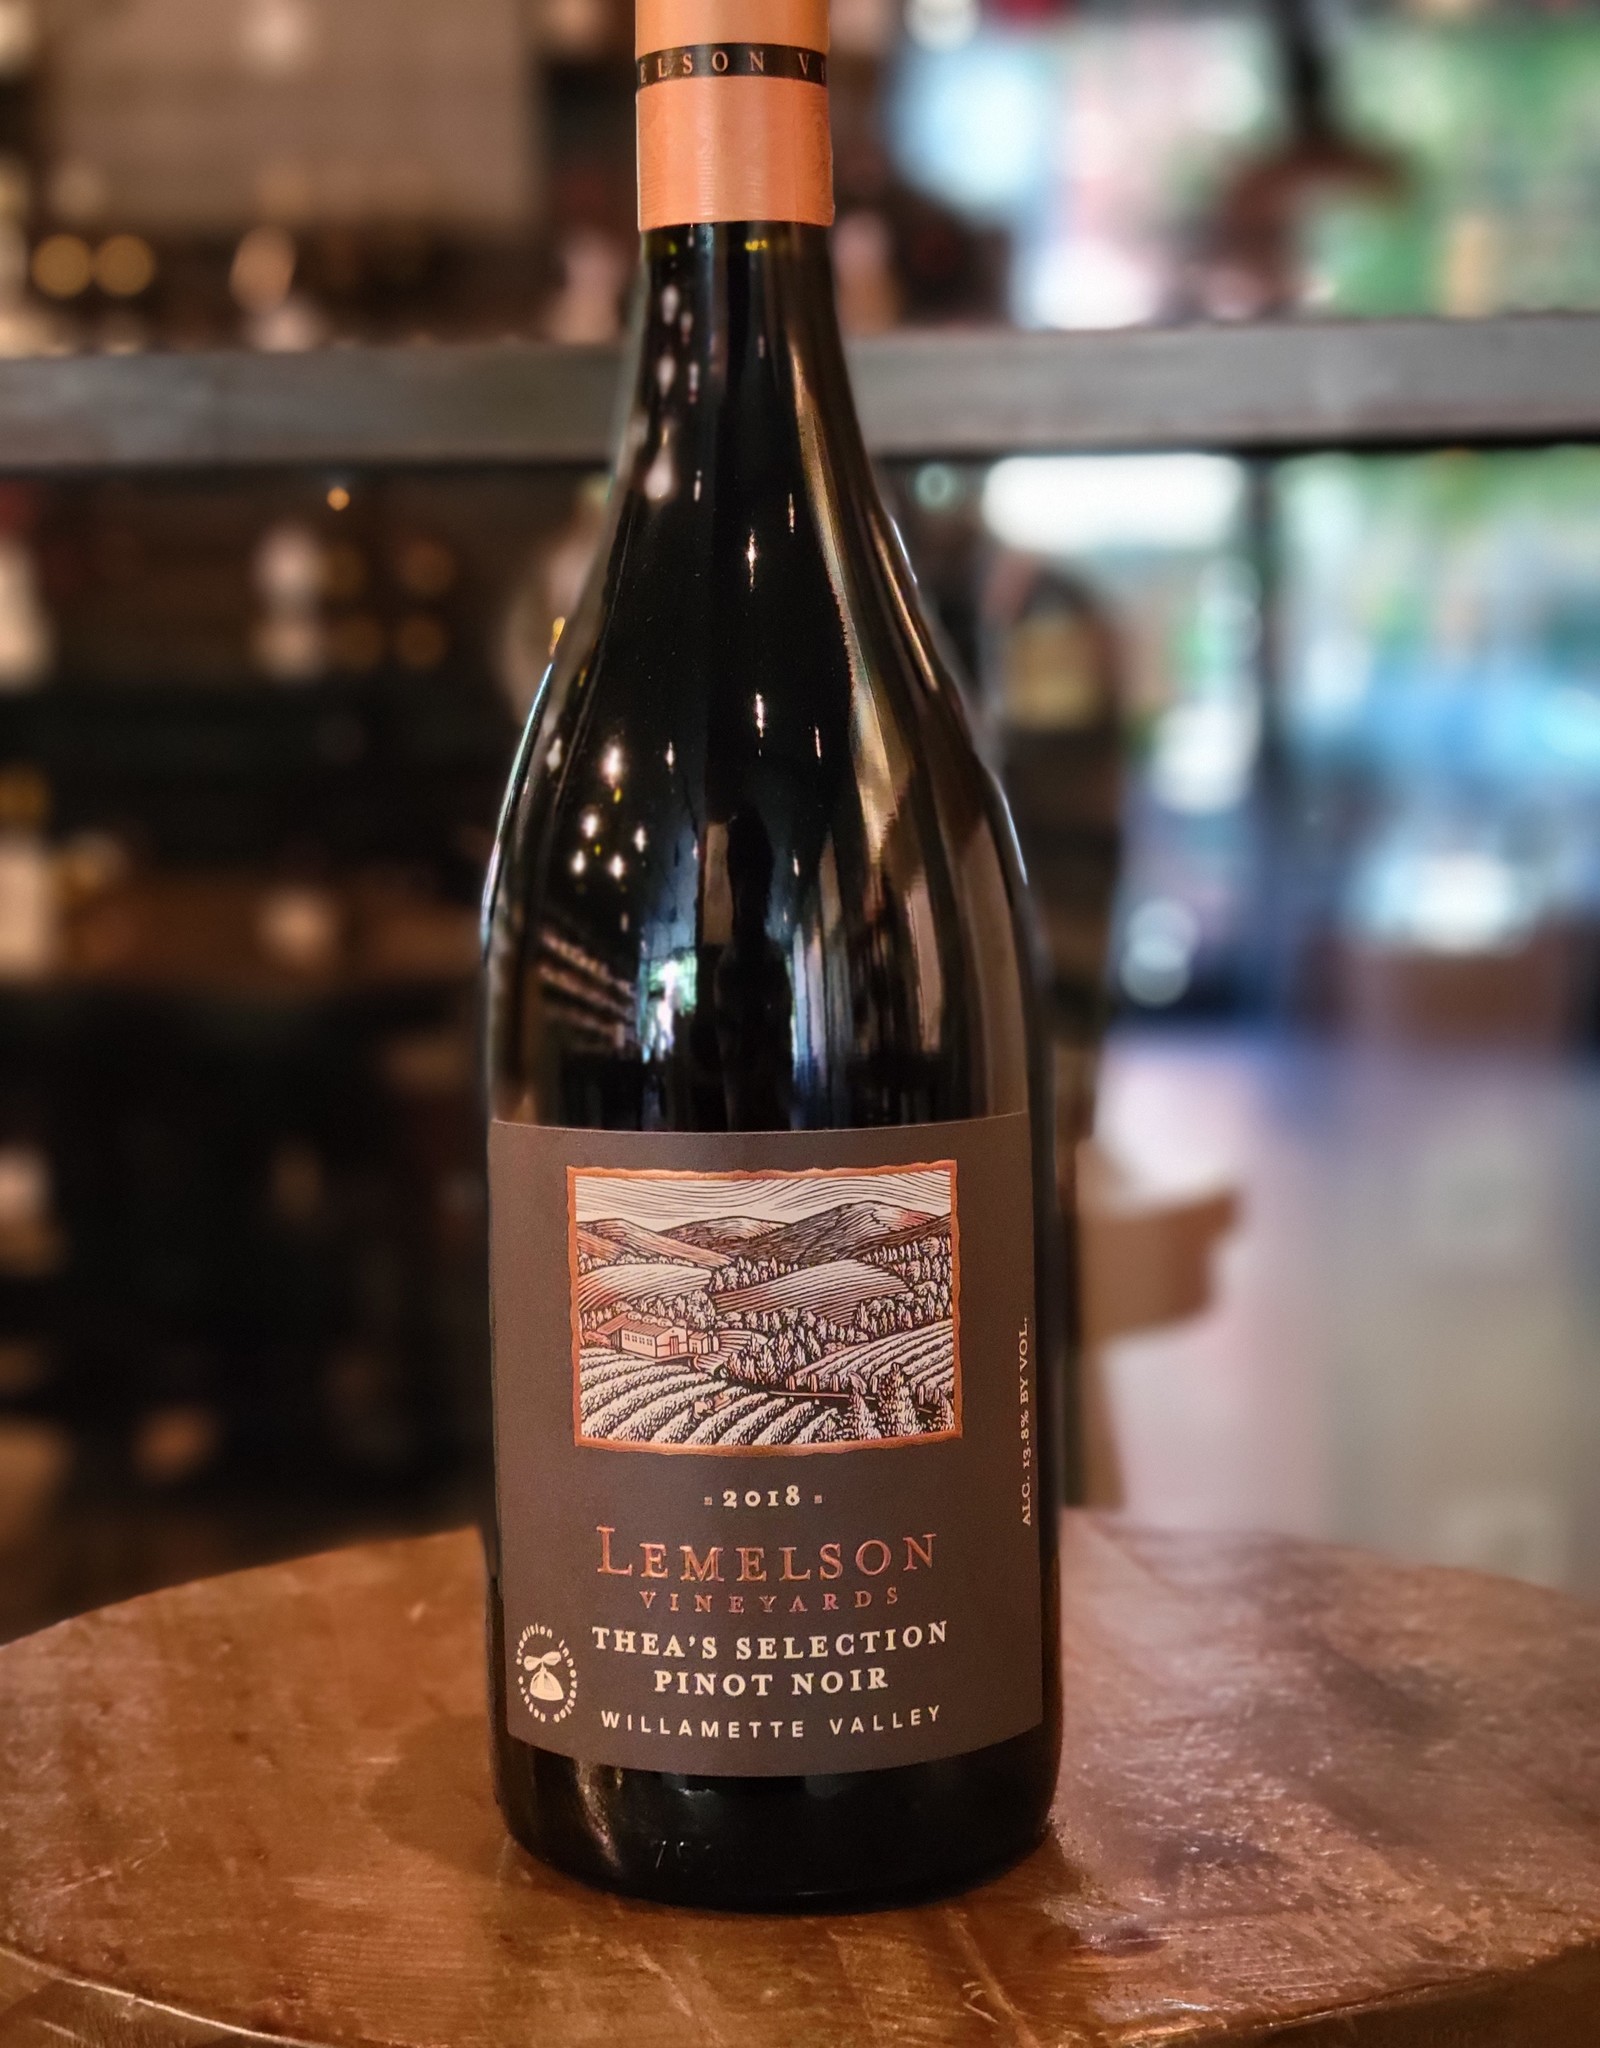 Lemelson Vineyards 'Thea's Selection' Pinot Noir